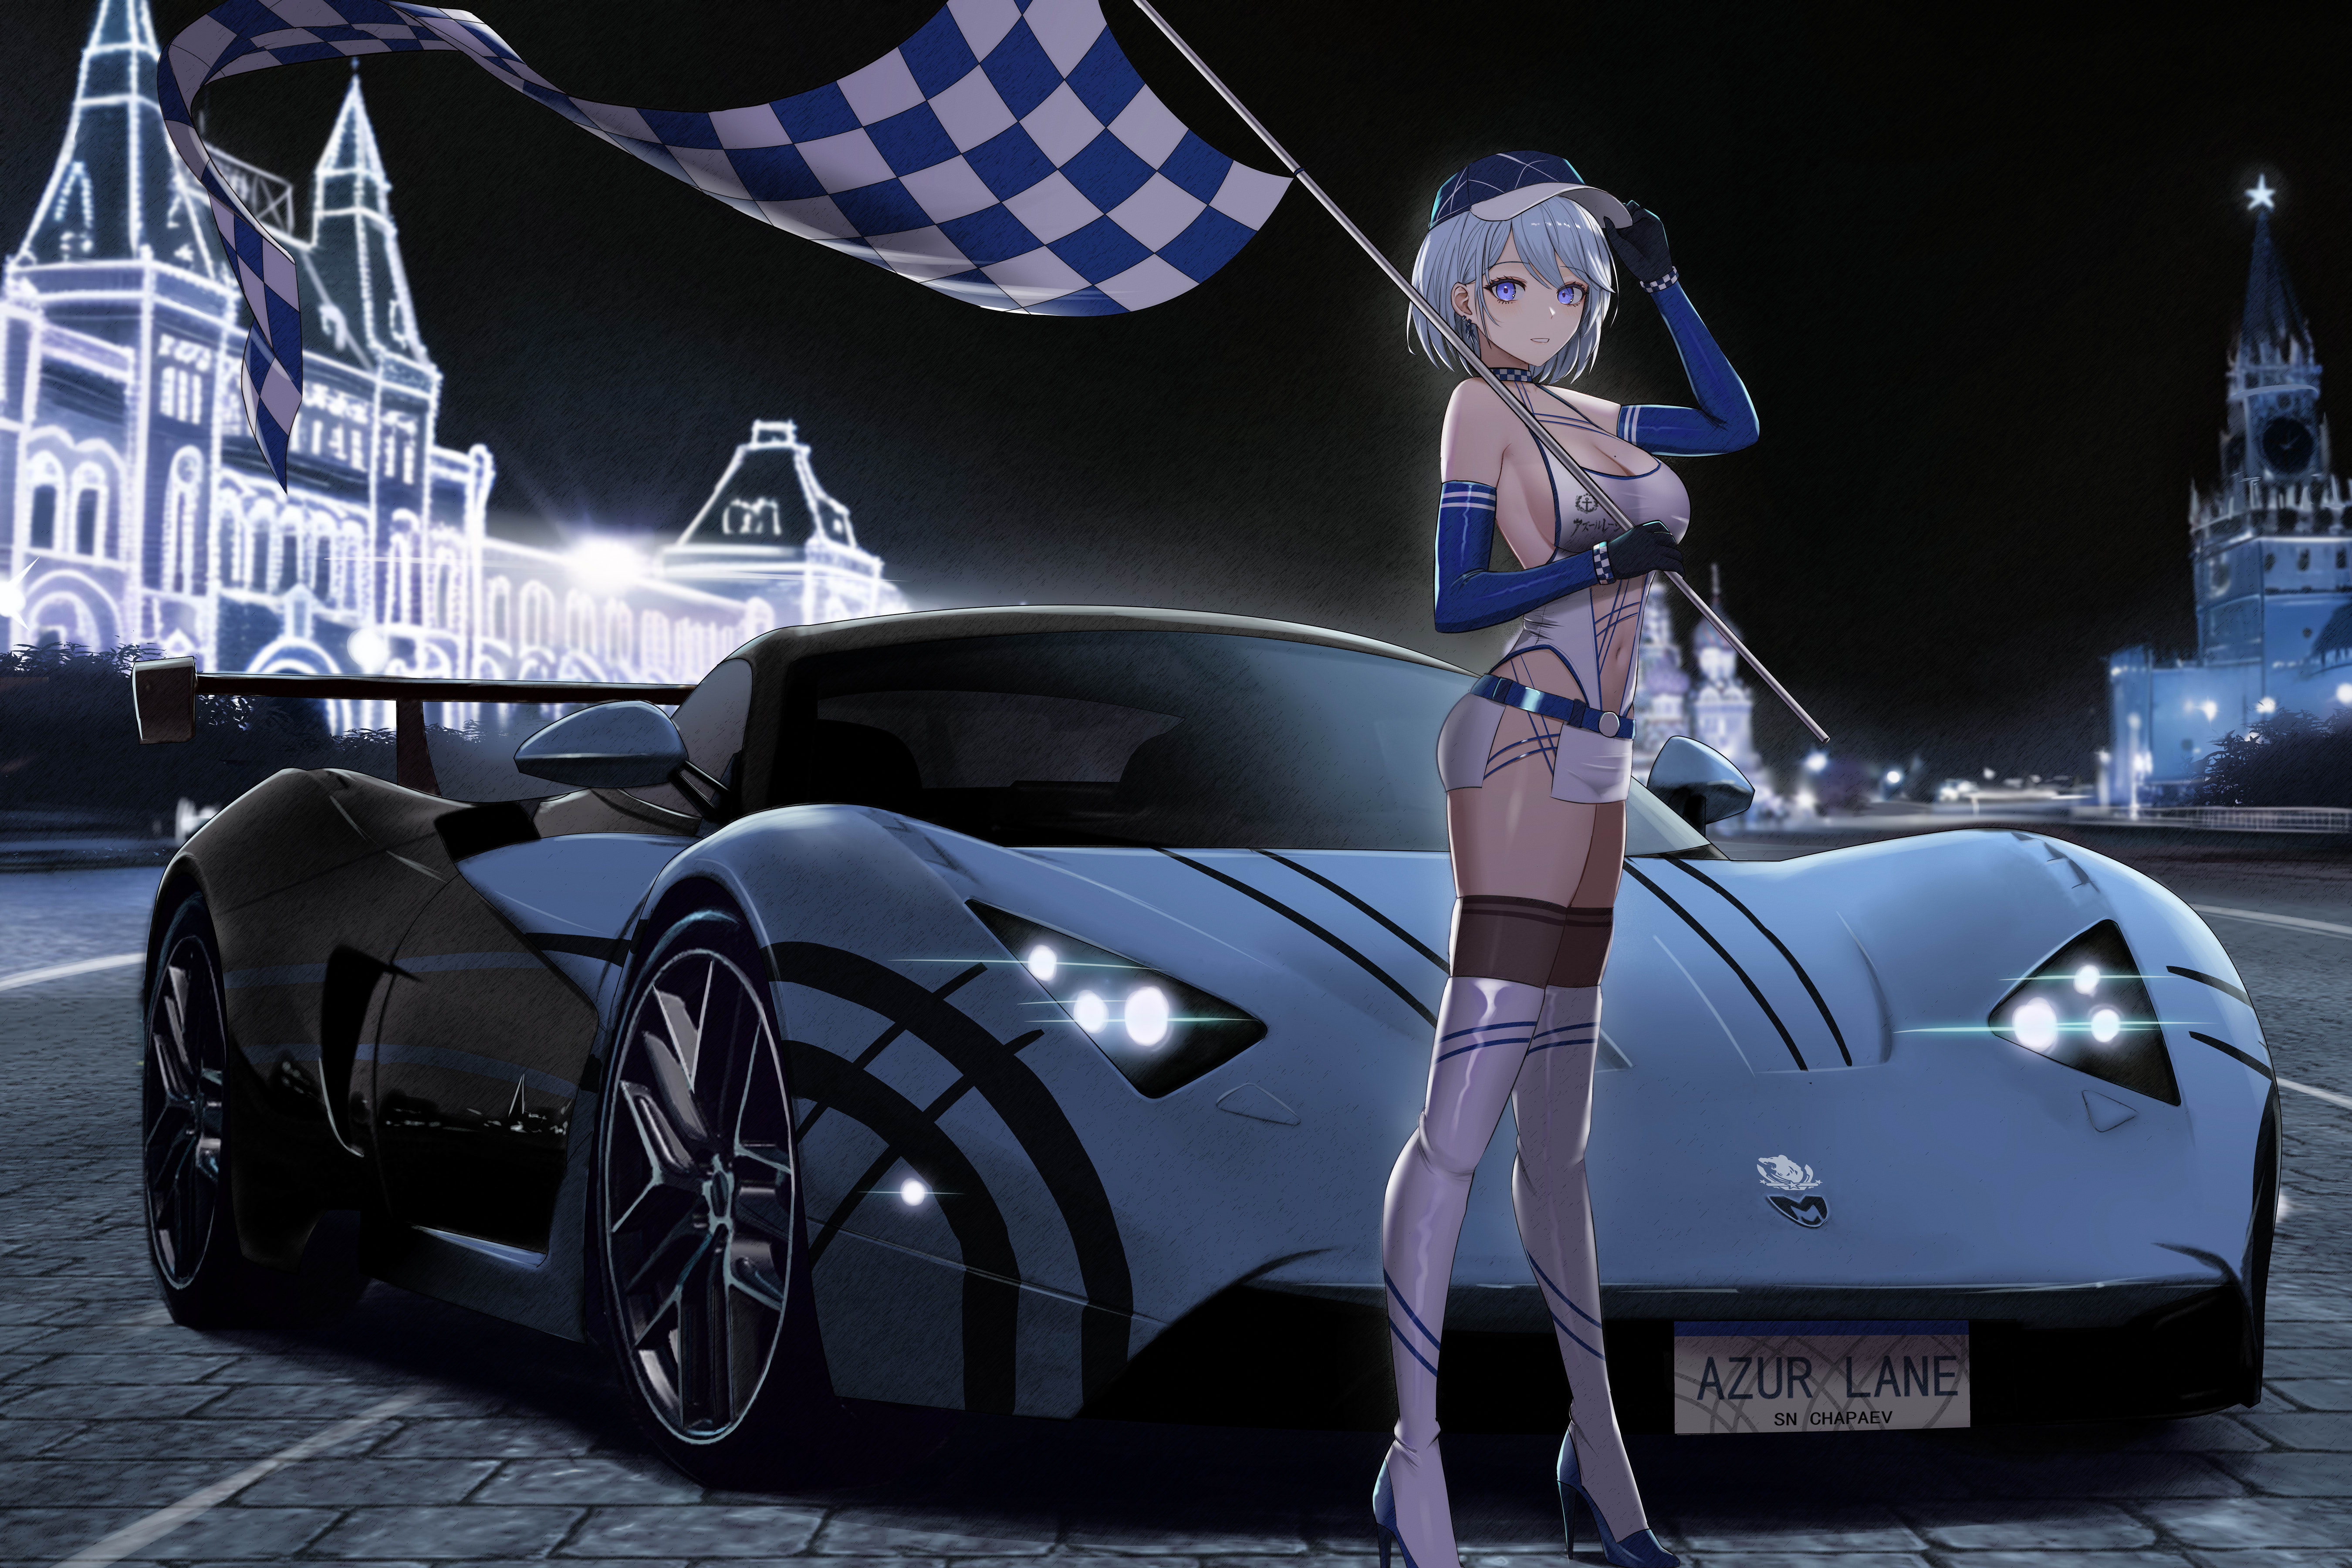 Anime 5400x3600 anime girls racing Azur Lane skimpy clothes flag car heels hat big boobs Chapayev (Azur Lane) Race Queen Outfit Marussia Russian cars Red Square Kremlin Russia Moscow